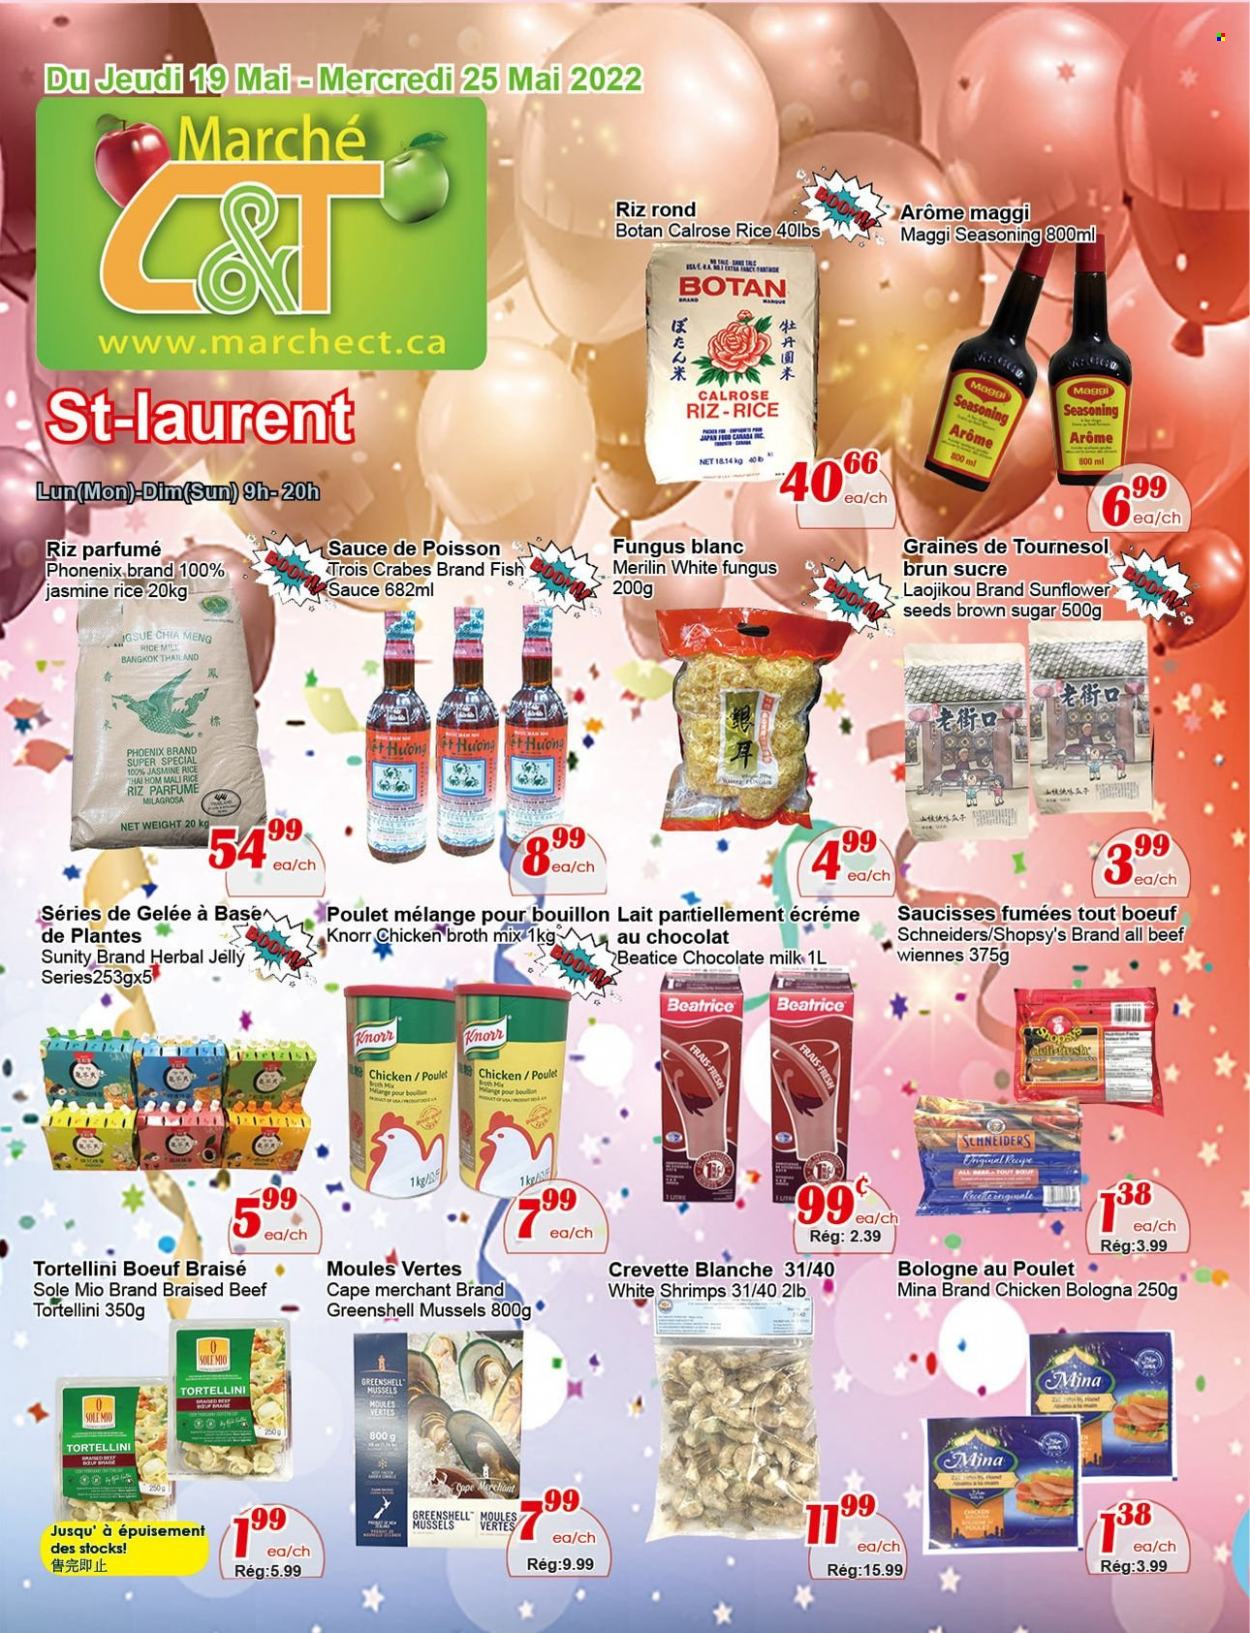 thumbnail - Marché C&T Flyer - May 19, 2022 - May 25, 2022 - Sales products - mussels, fish, shrimps, sauce, tortellini, bologna sausage, milk, milk chocolate, chocolate, jelly, bouillon, cane sugar, chicken broth, Maggi, broth, rice, jasmine rice, spice, fish sauce, sunflower seeds, Knorr. Page 1.